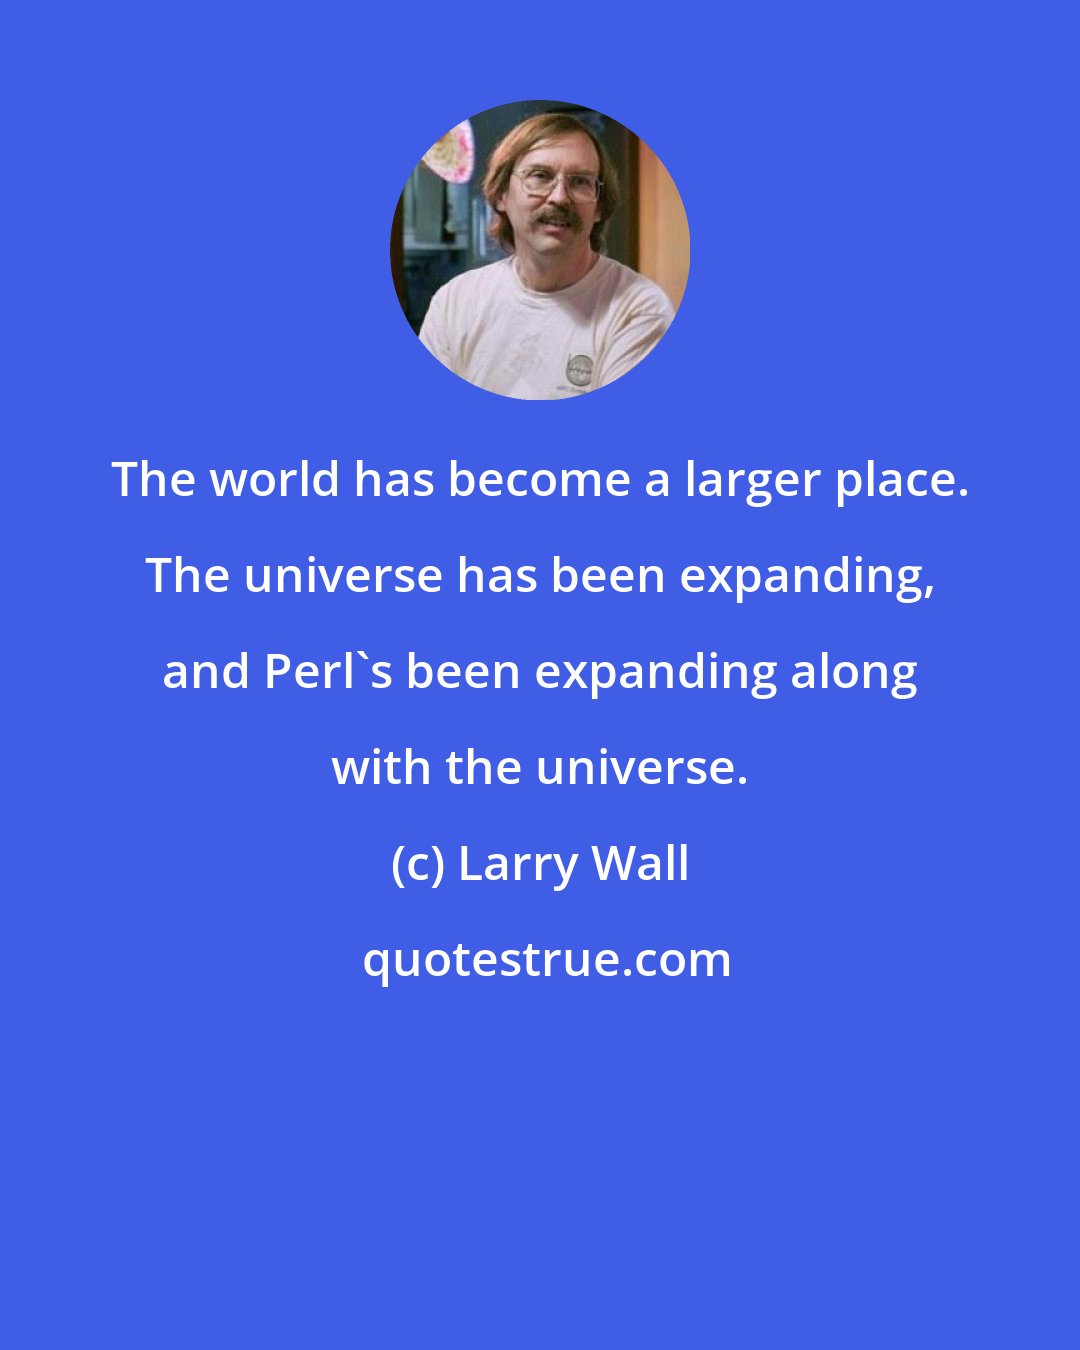 Larry Wall: The world has become a larger place. The universe has been expanding, and Perl's been expanding along with the universe.